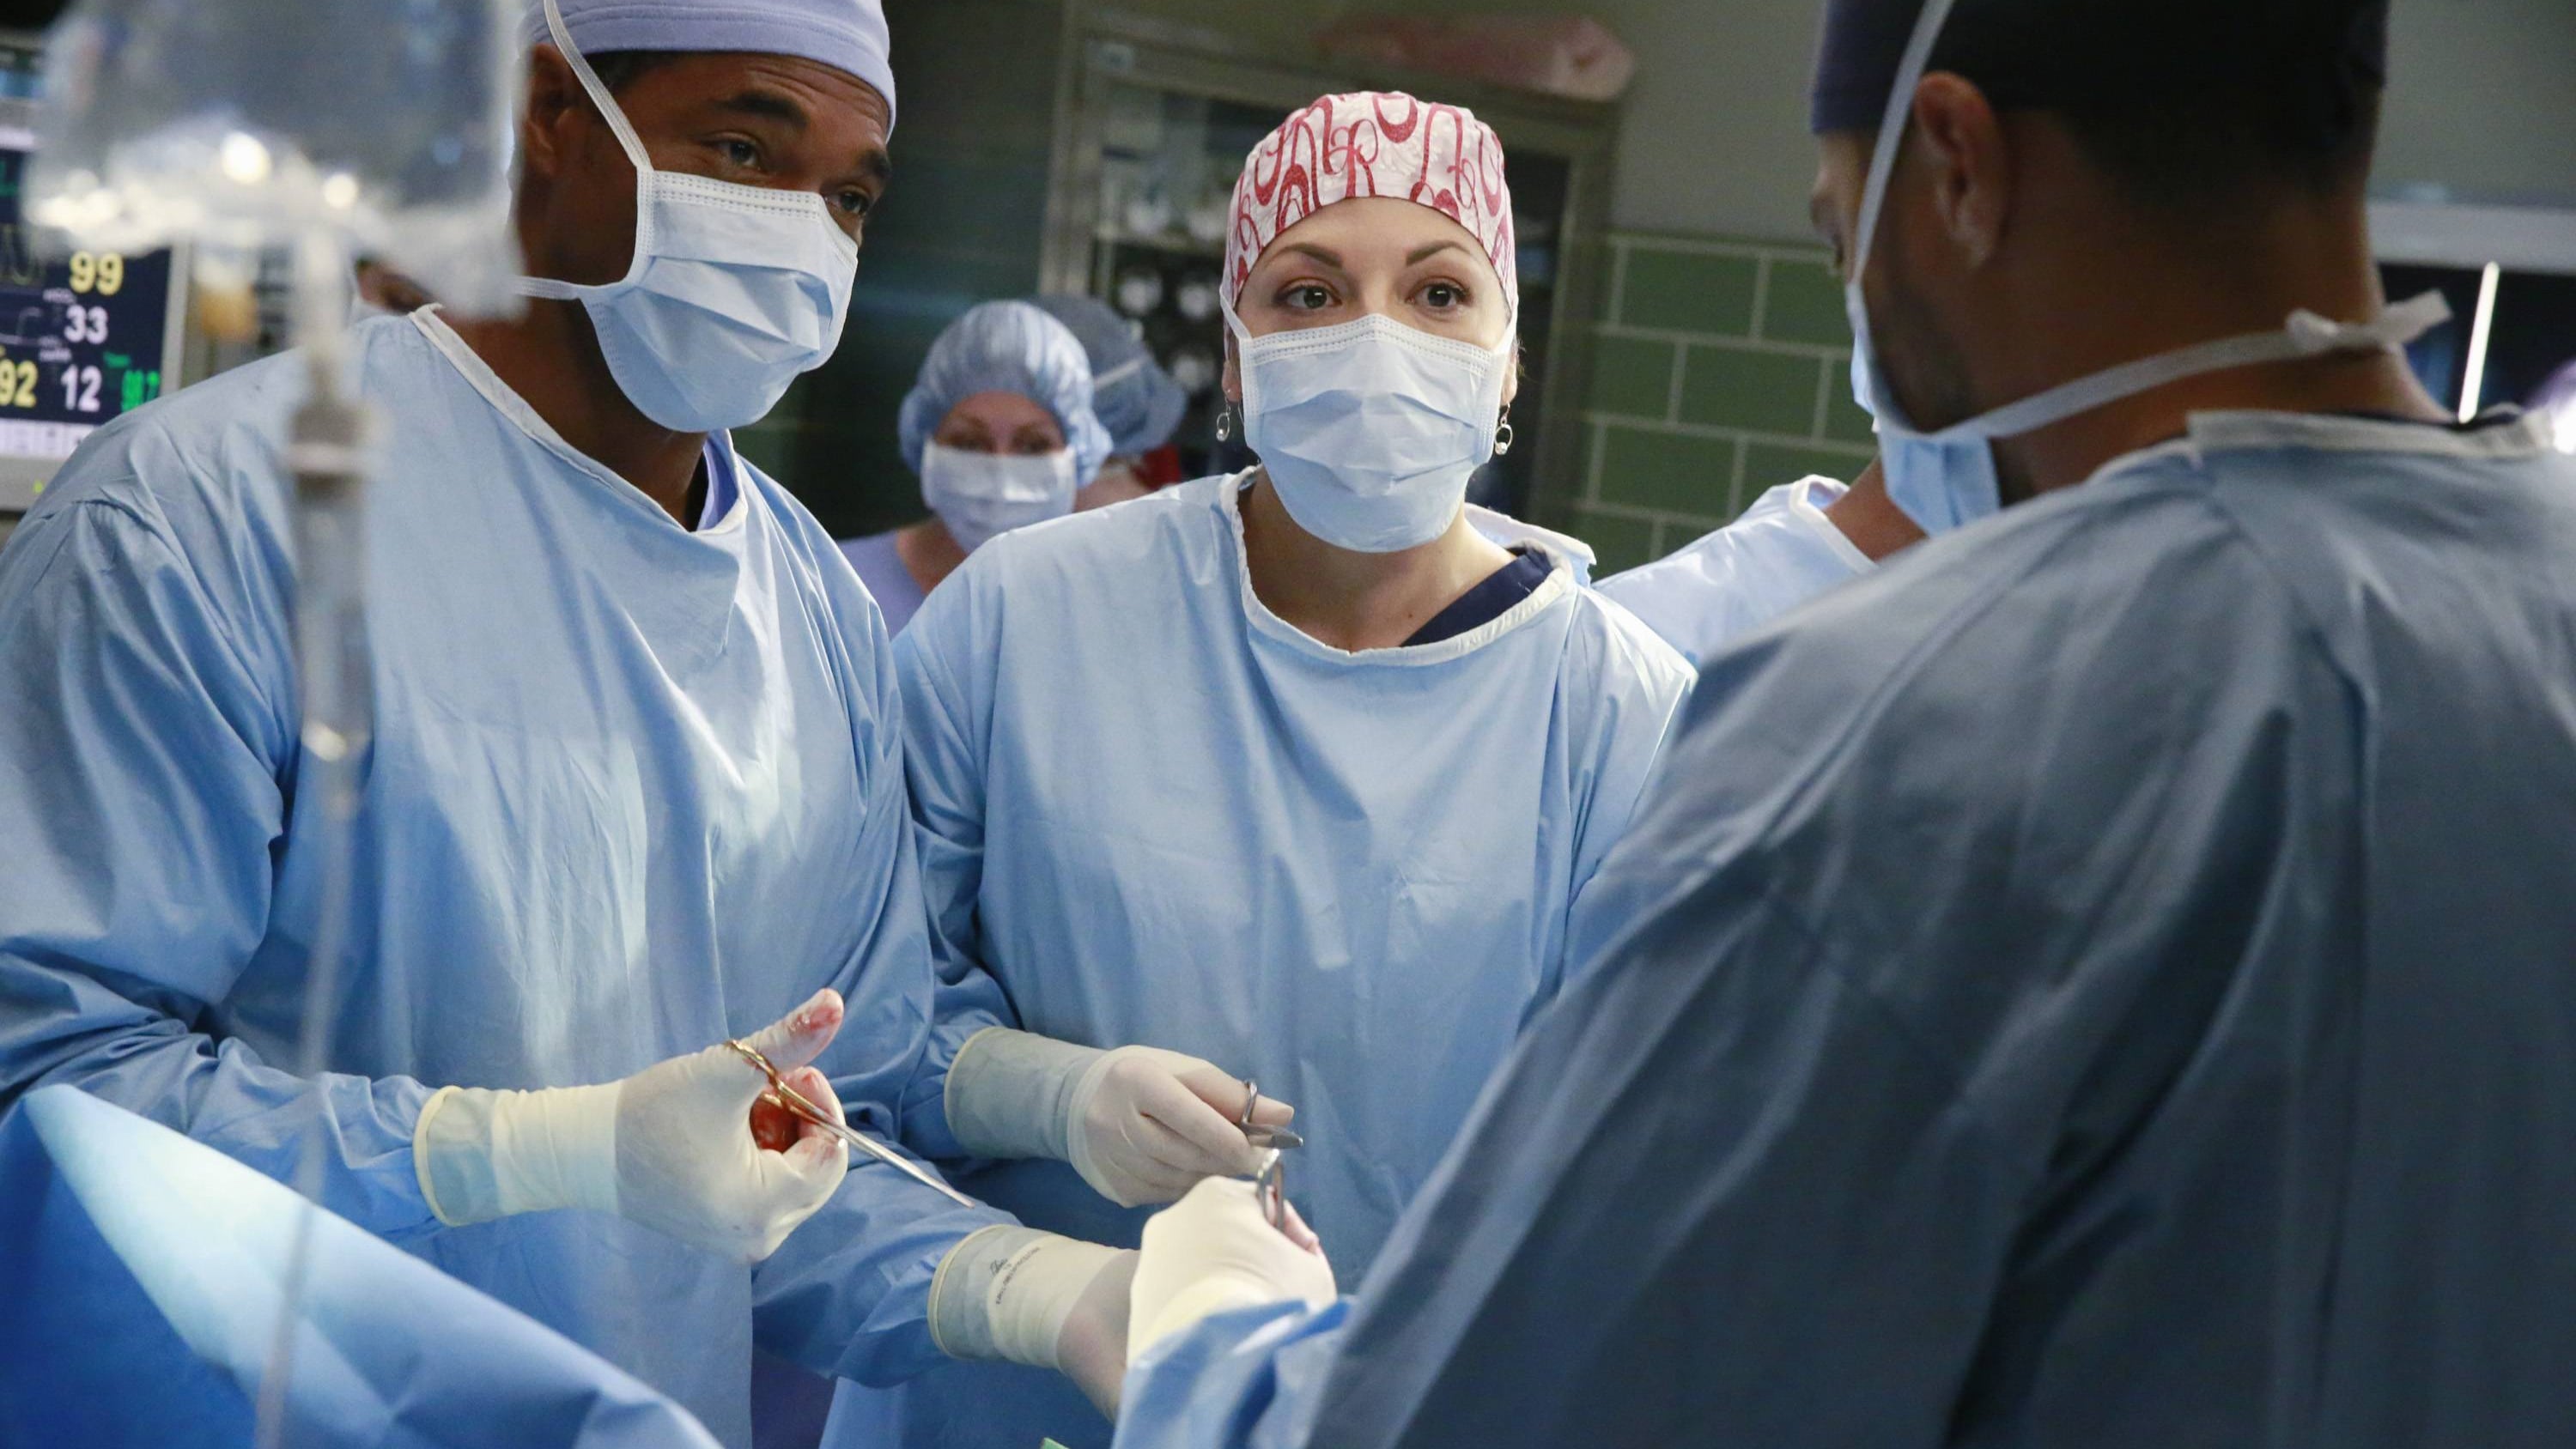 Grey's Anatomy Season 12 :Episode 8  Things We Lost in the Fire